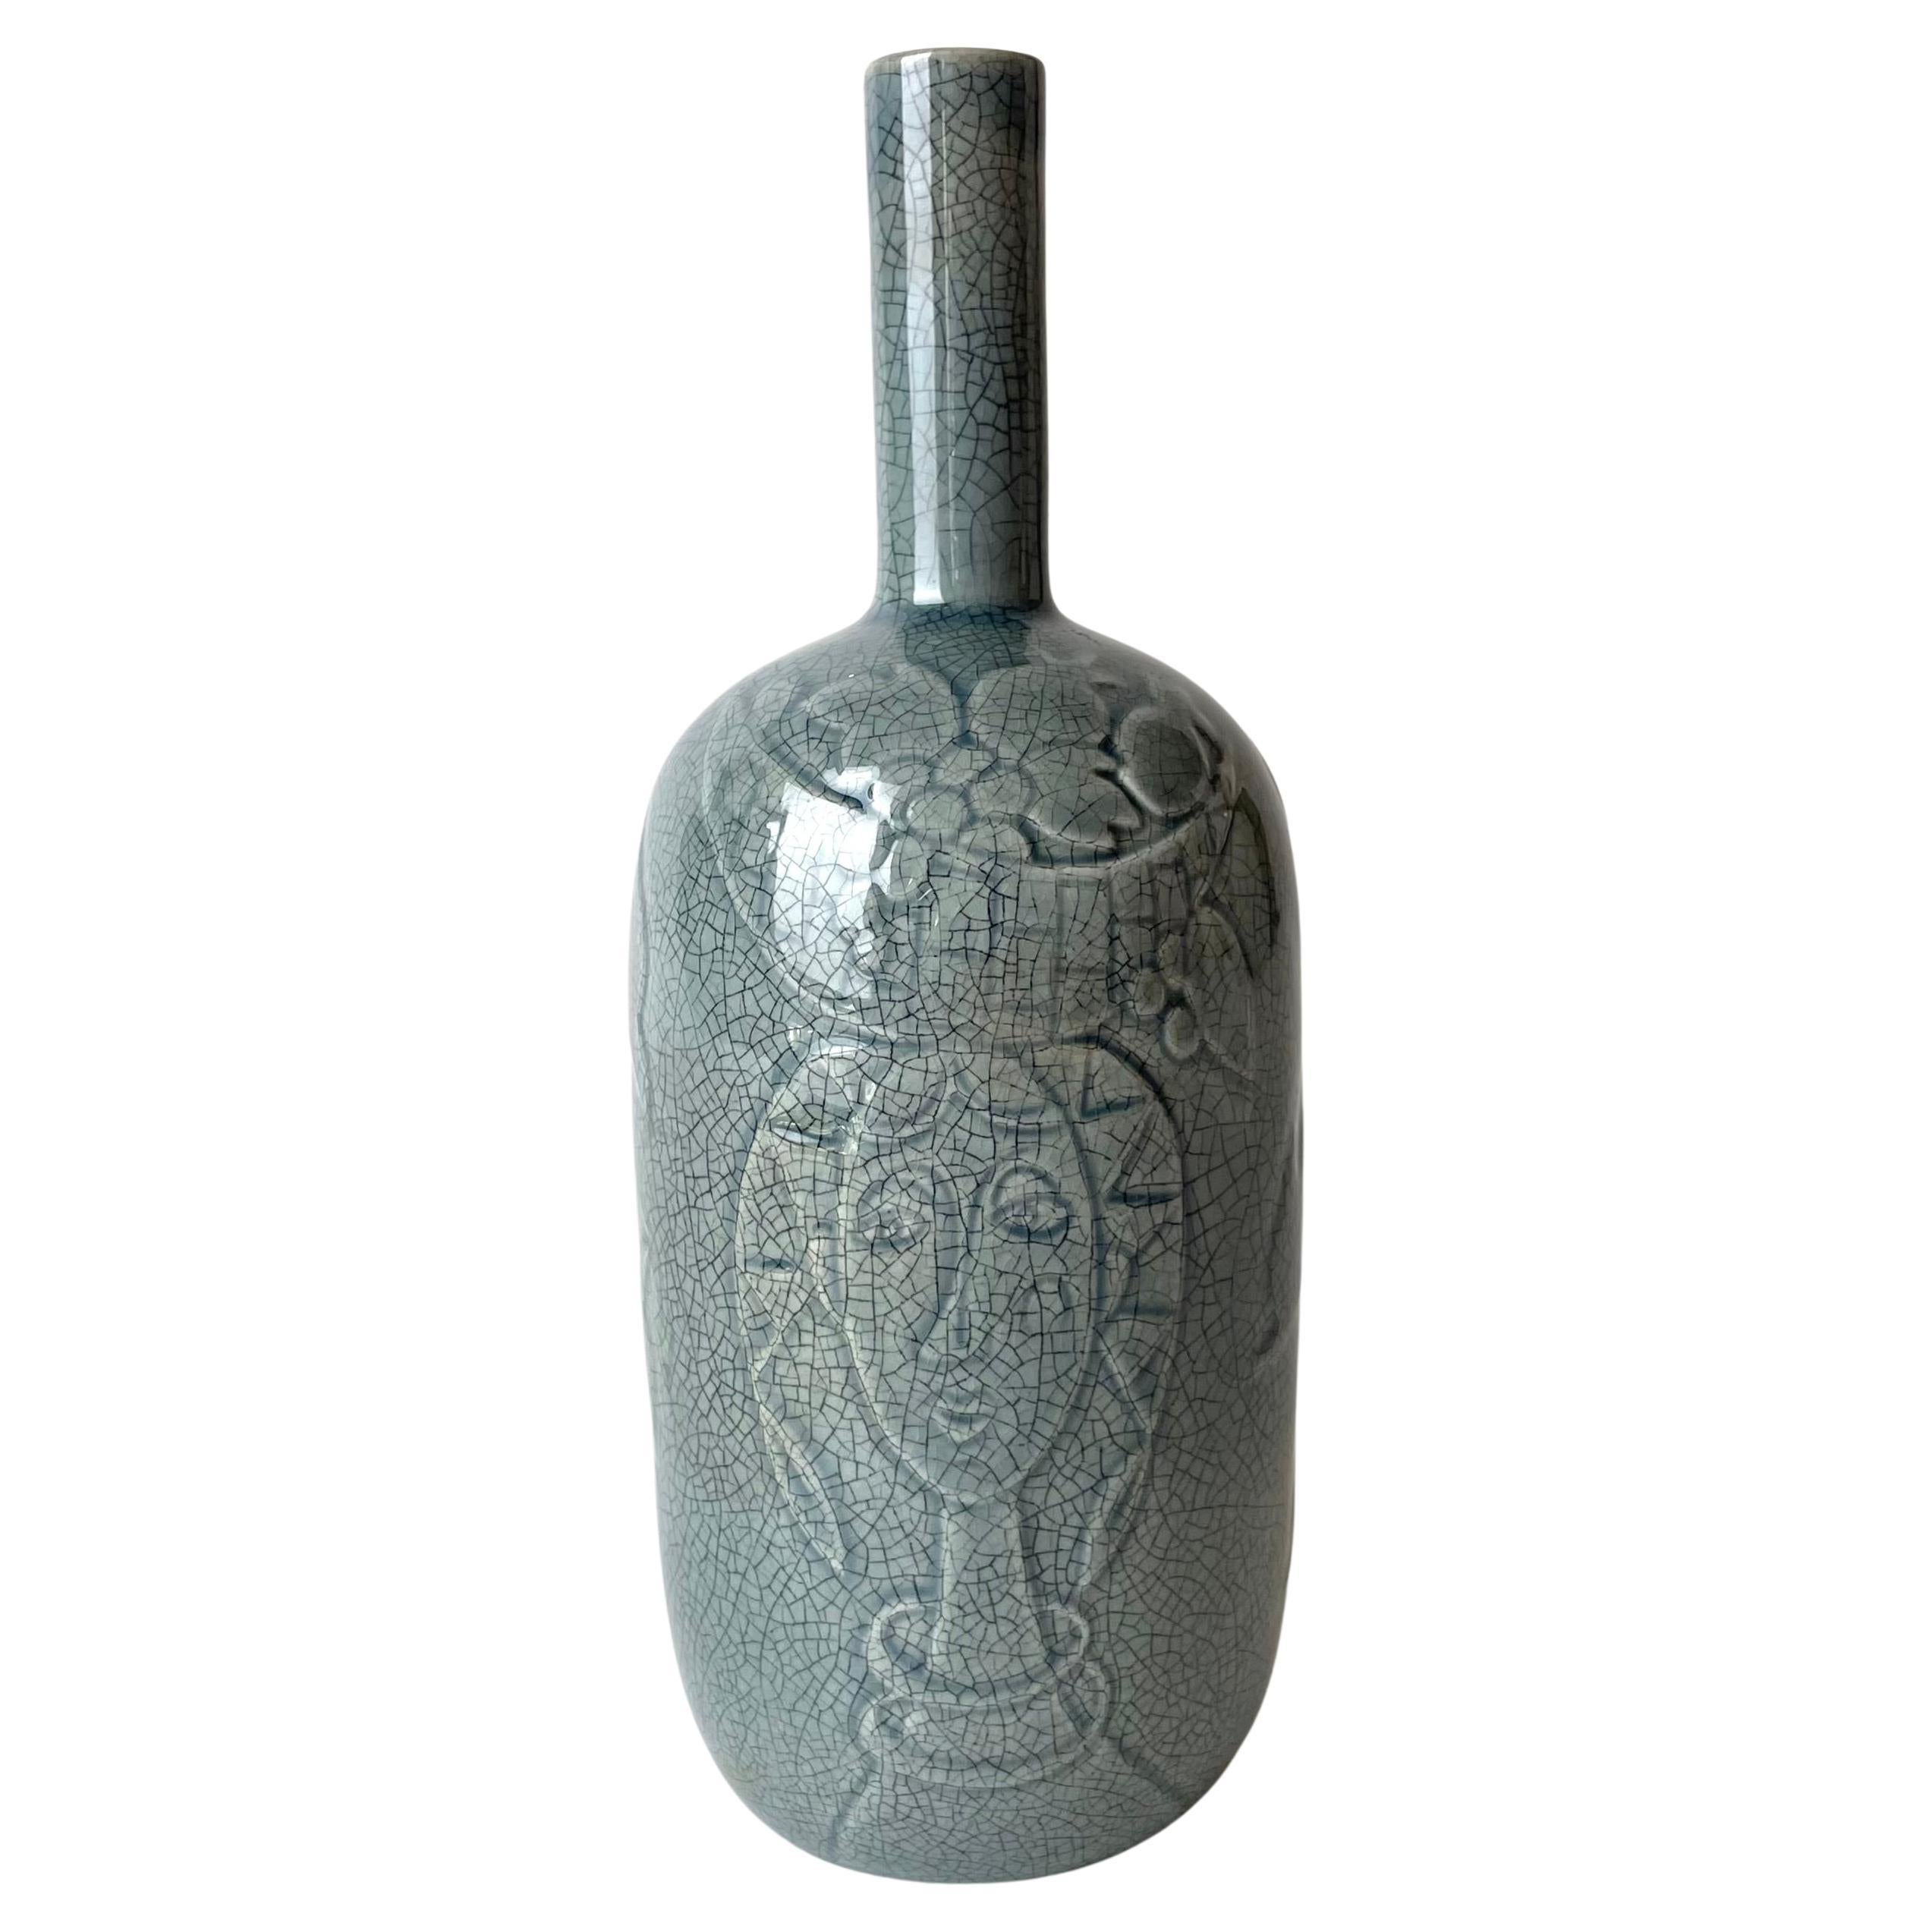 Beautiful ceramic Vase by Carl-Harry Stålhane, Sweden from the Mid-20th Century For Sale